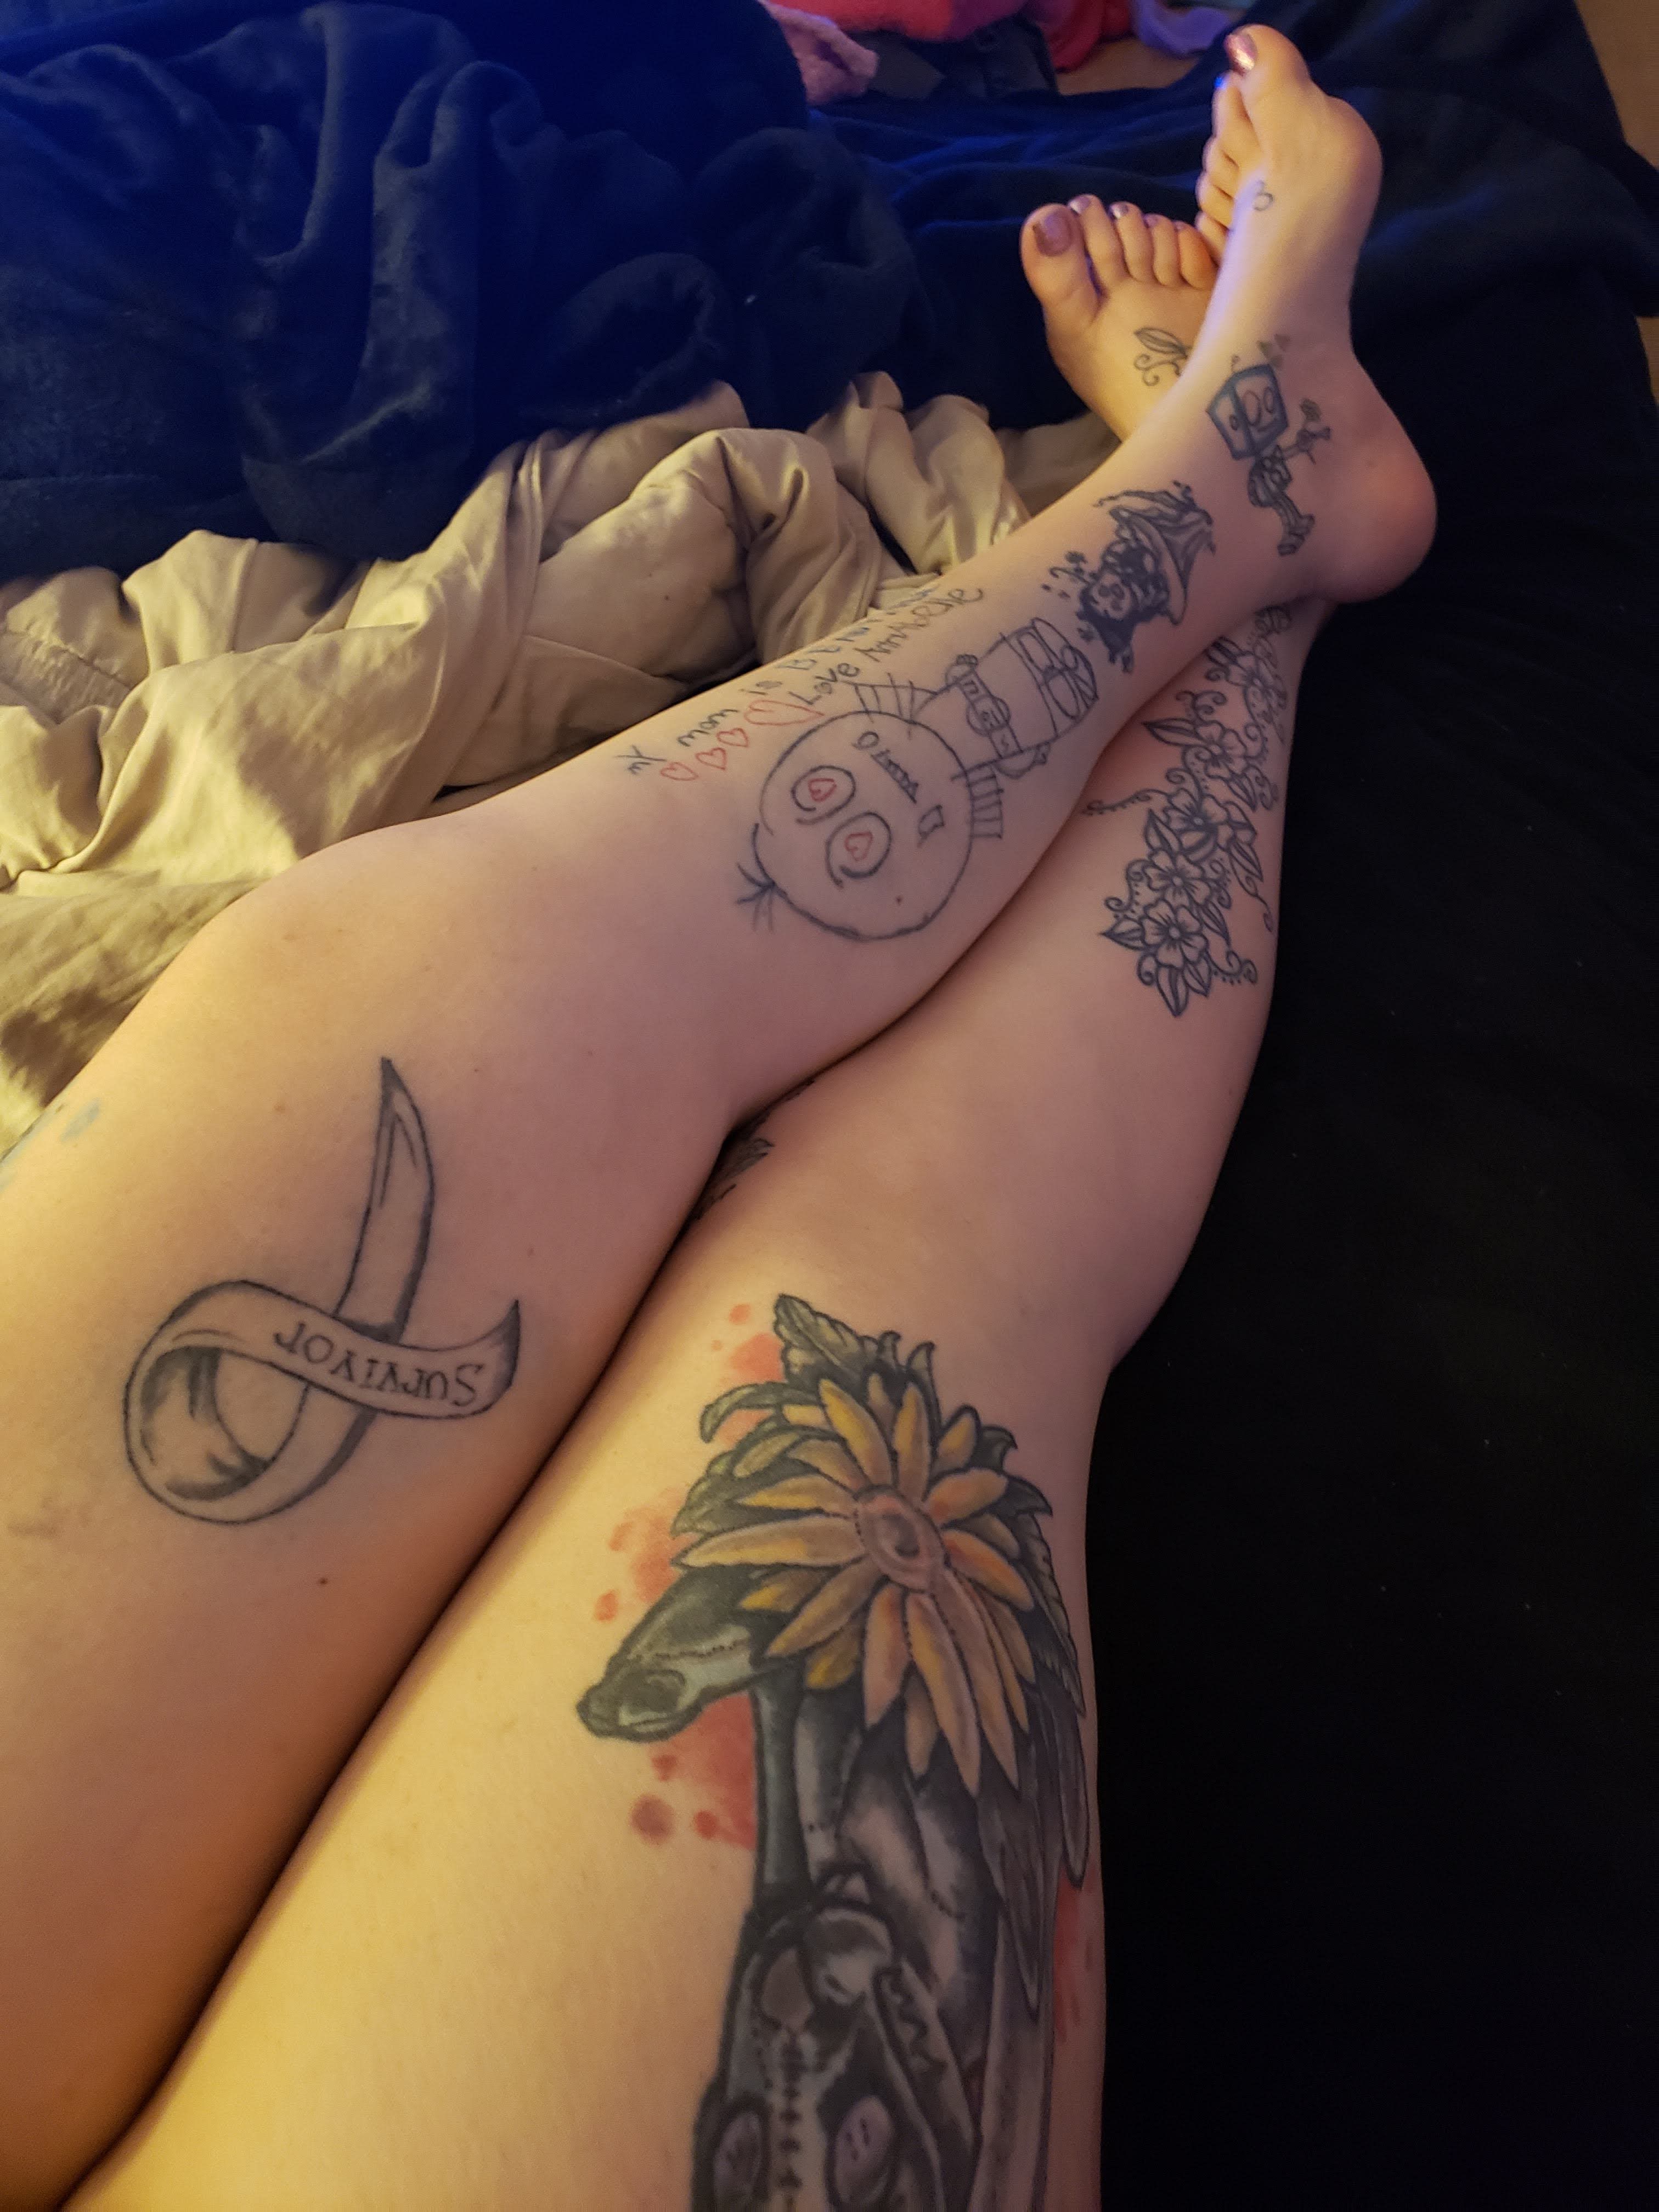 Tattoos Helping To Cope With Sexual Assault Trauma